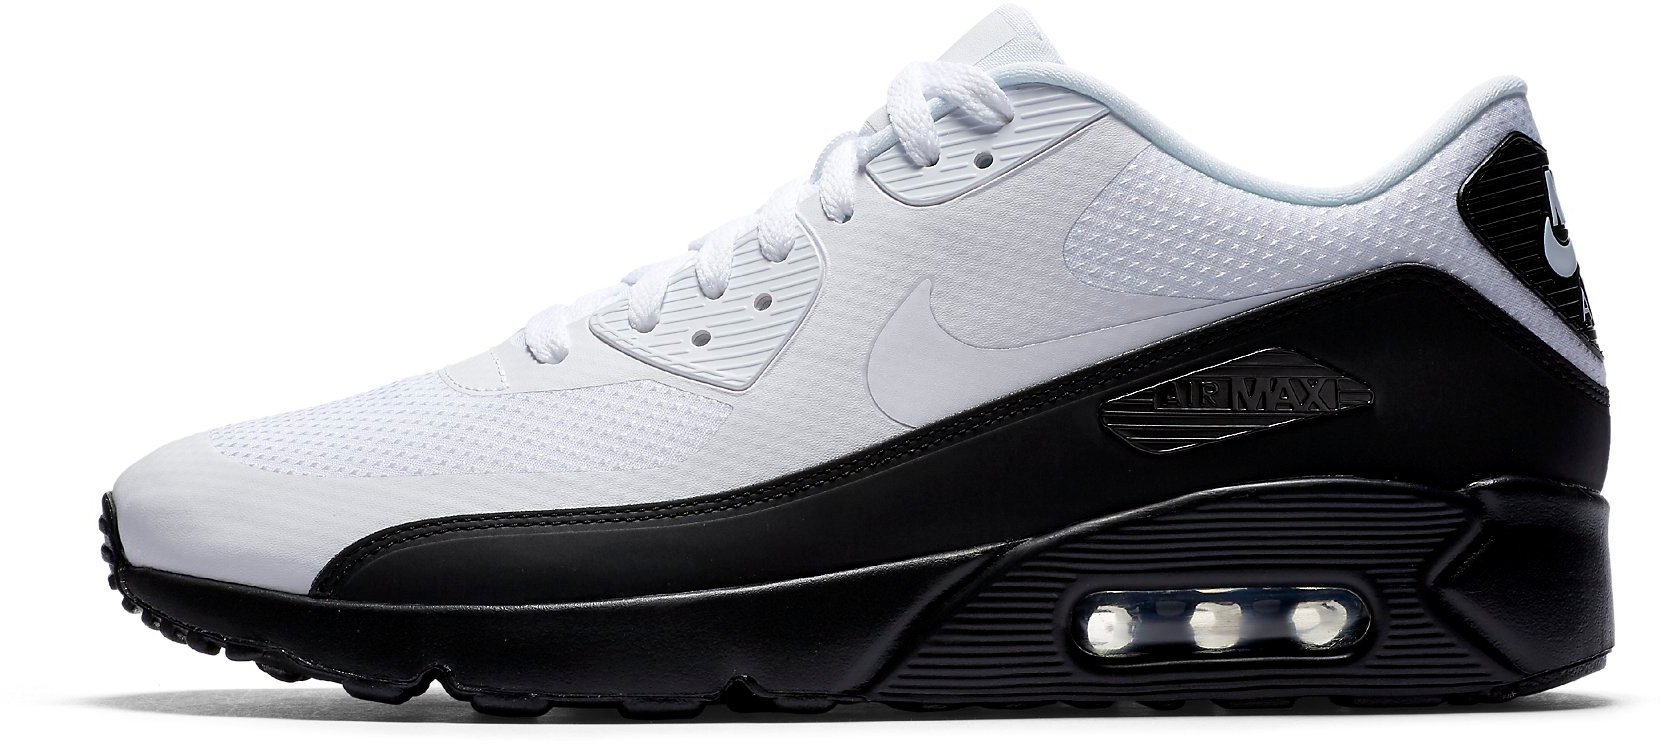 Silently invention Execution Shoes Nike AIR MAX 90 ULTRA 2.0 ESSENTIAL - Top4Football.com